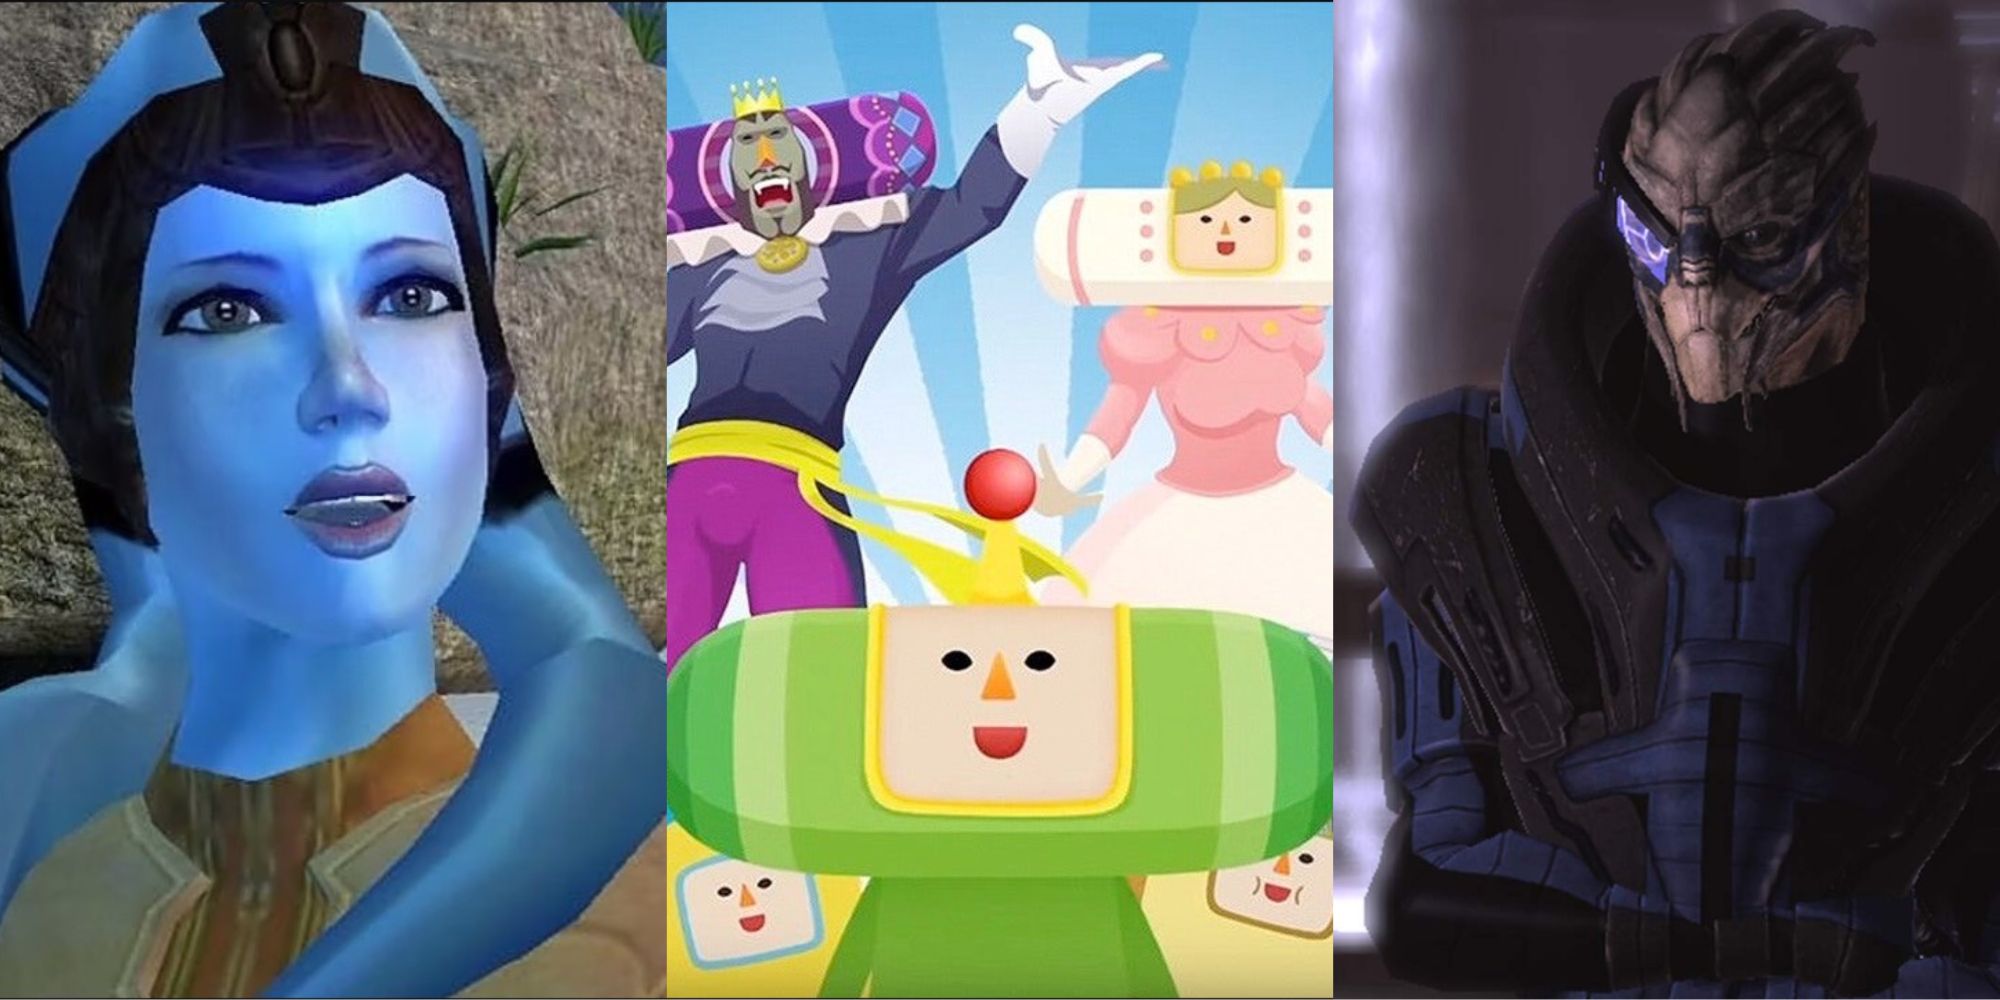 Mission Vao from Knights of the Old Republic, The Prince from Katamari Damacy, Garrus from the Mass Effect series